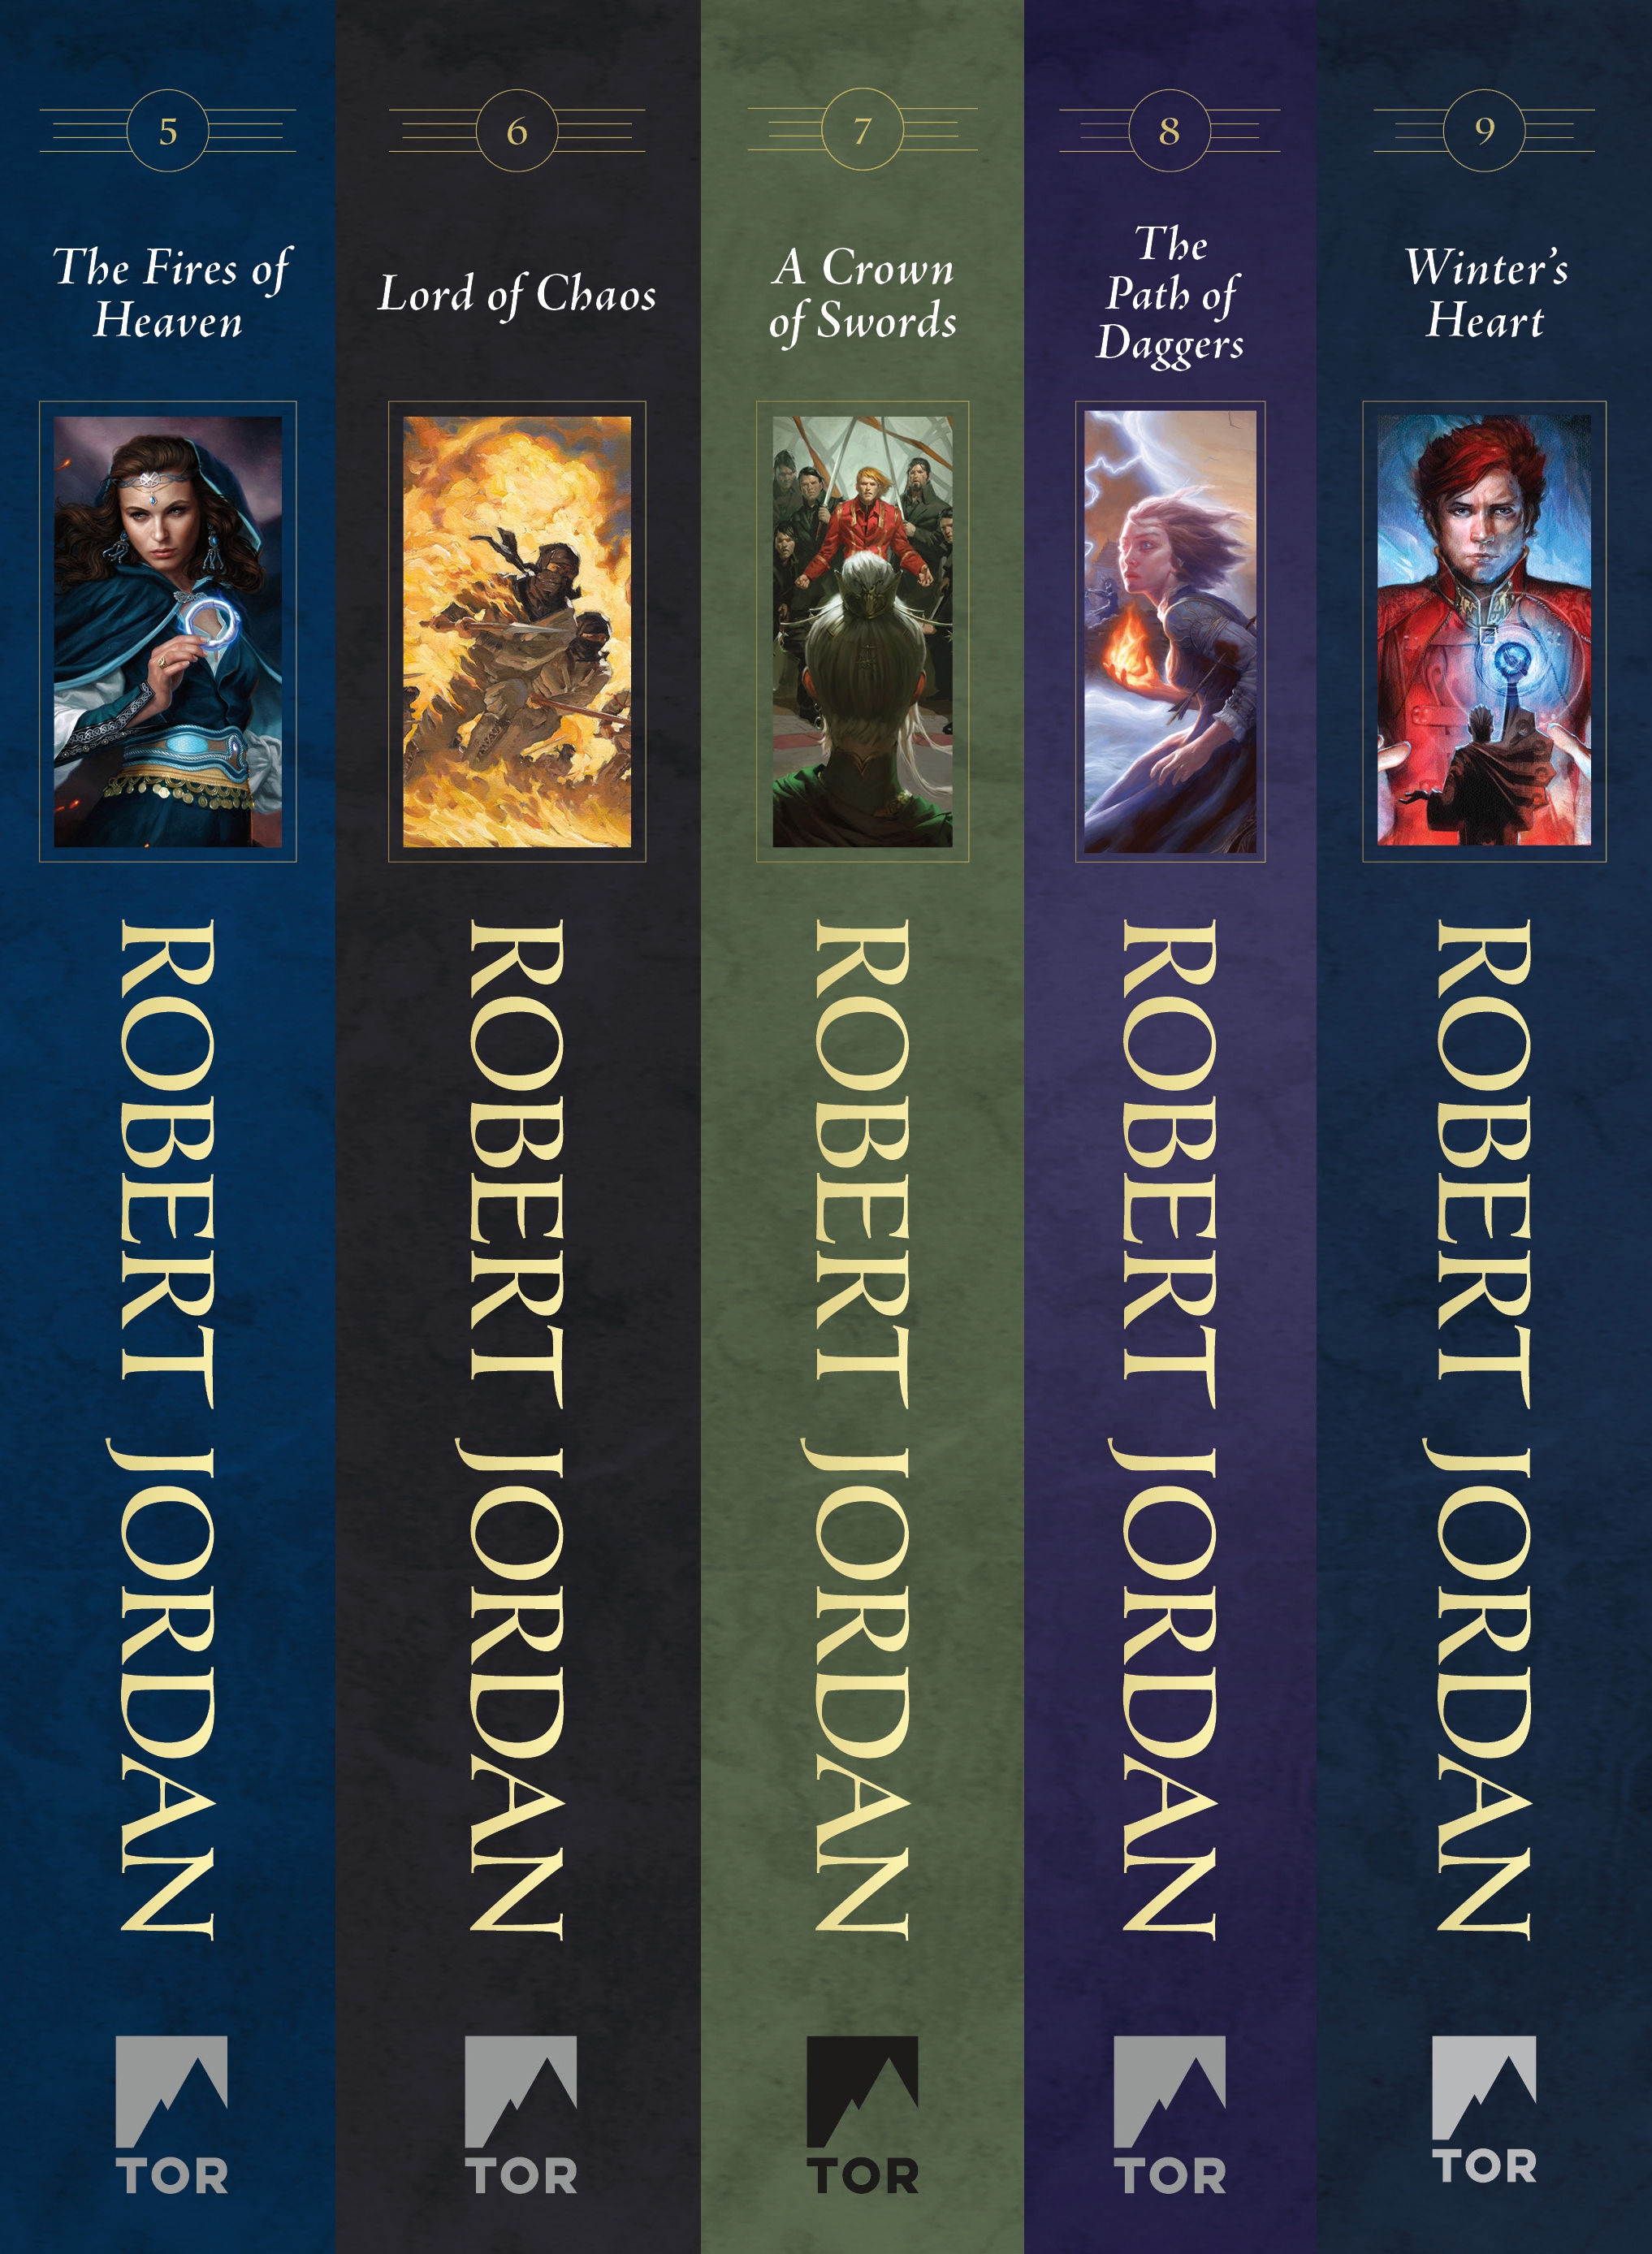 the wheel of time books in order